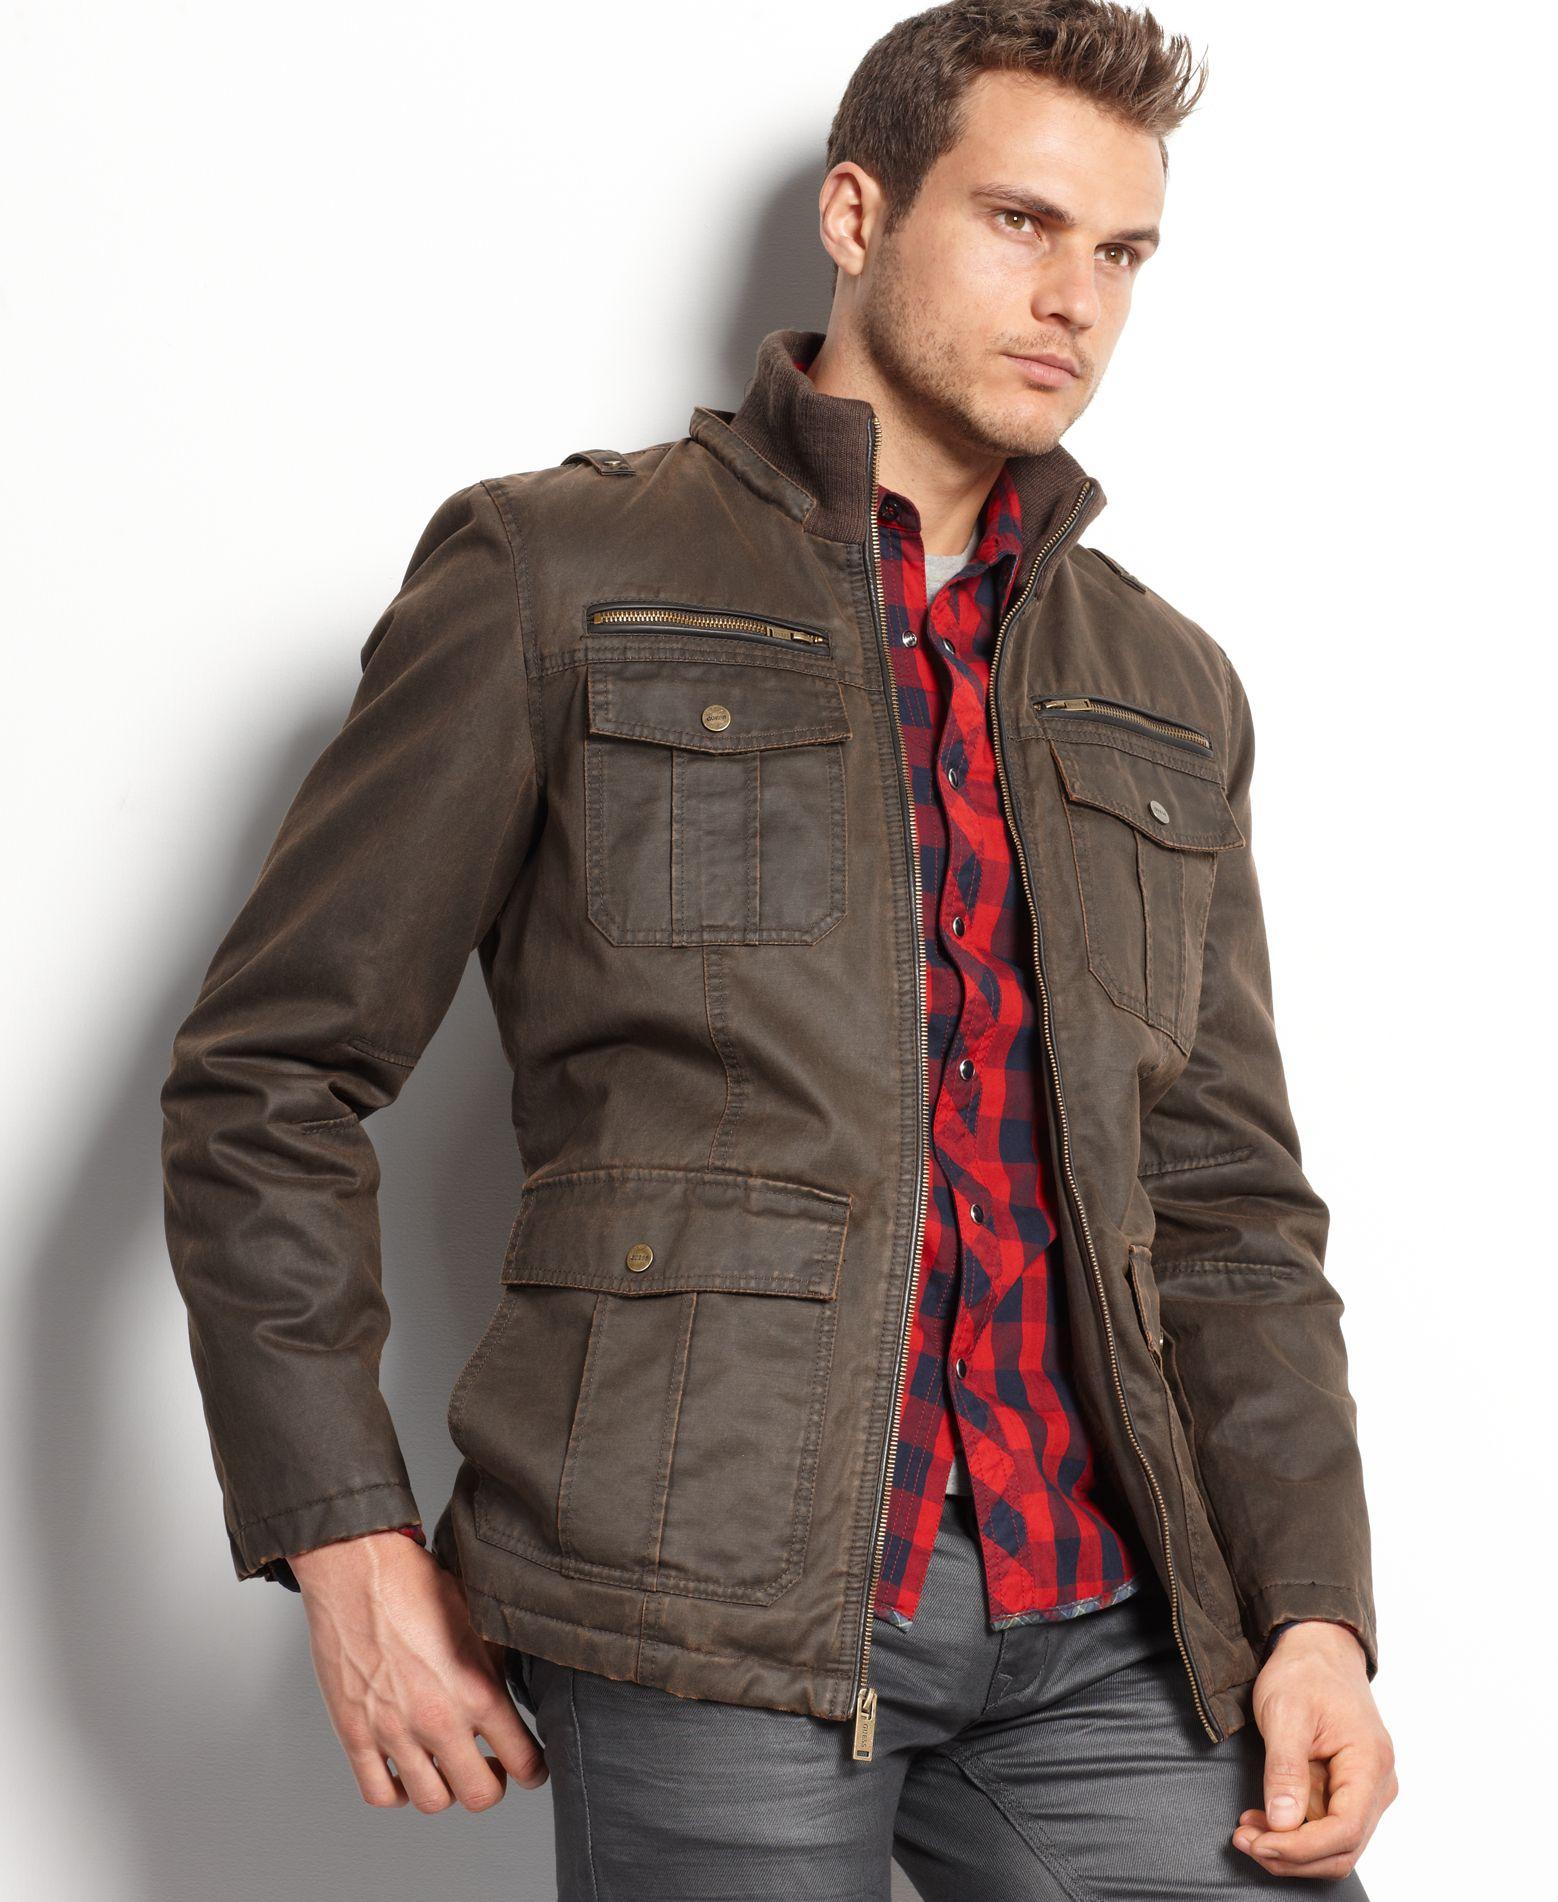 Guess Coat, Antique-finish Hooded Jacket in Brown for Men - Lyst